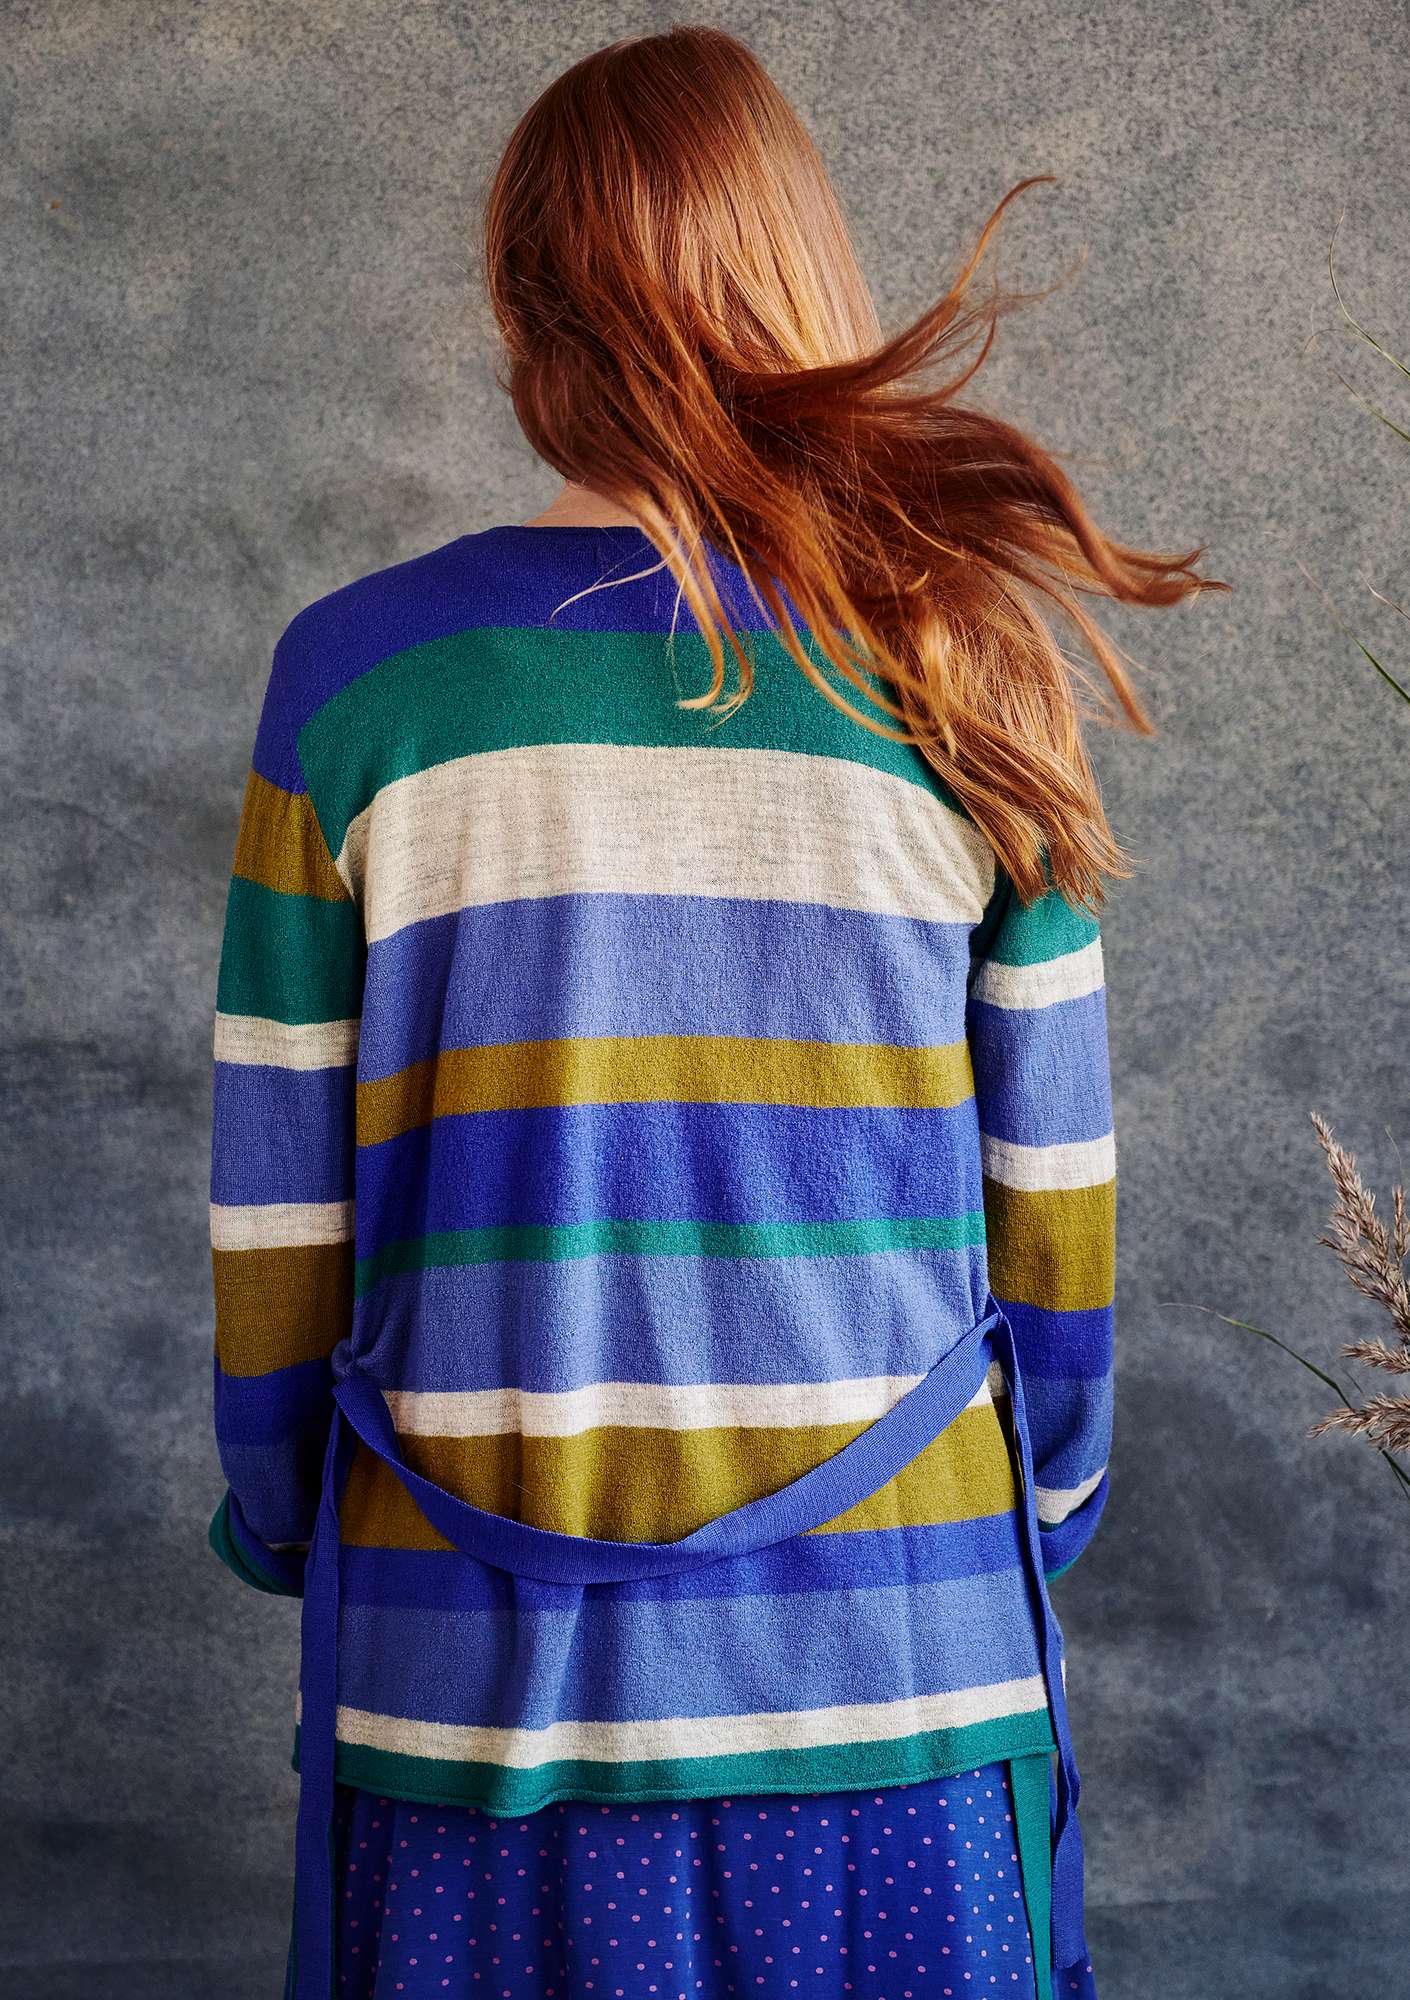 Solid-colour and striped wraparound cardigan crafted from felted wool cobalt blue/patterned thumbnail